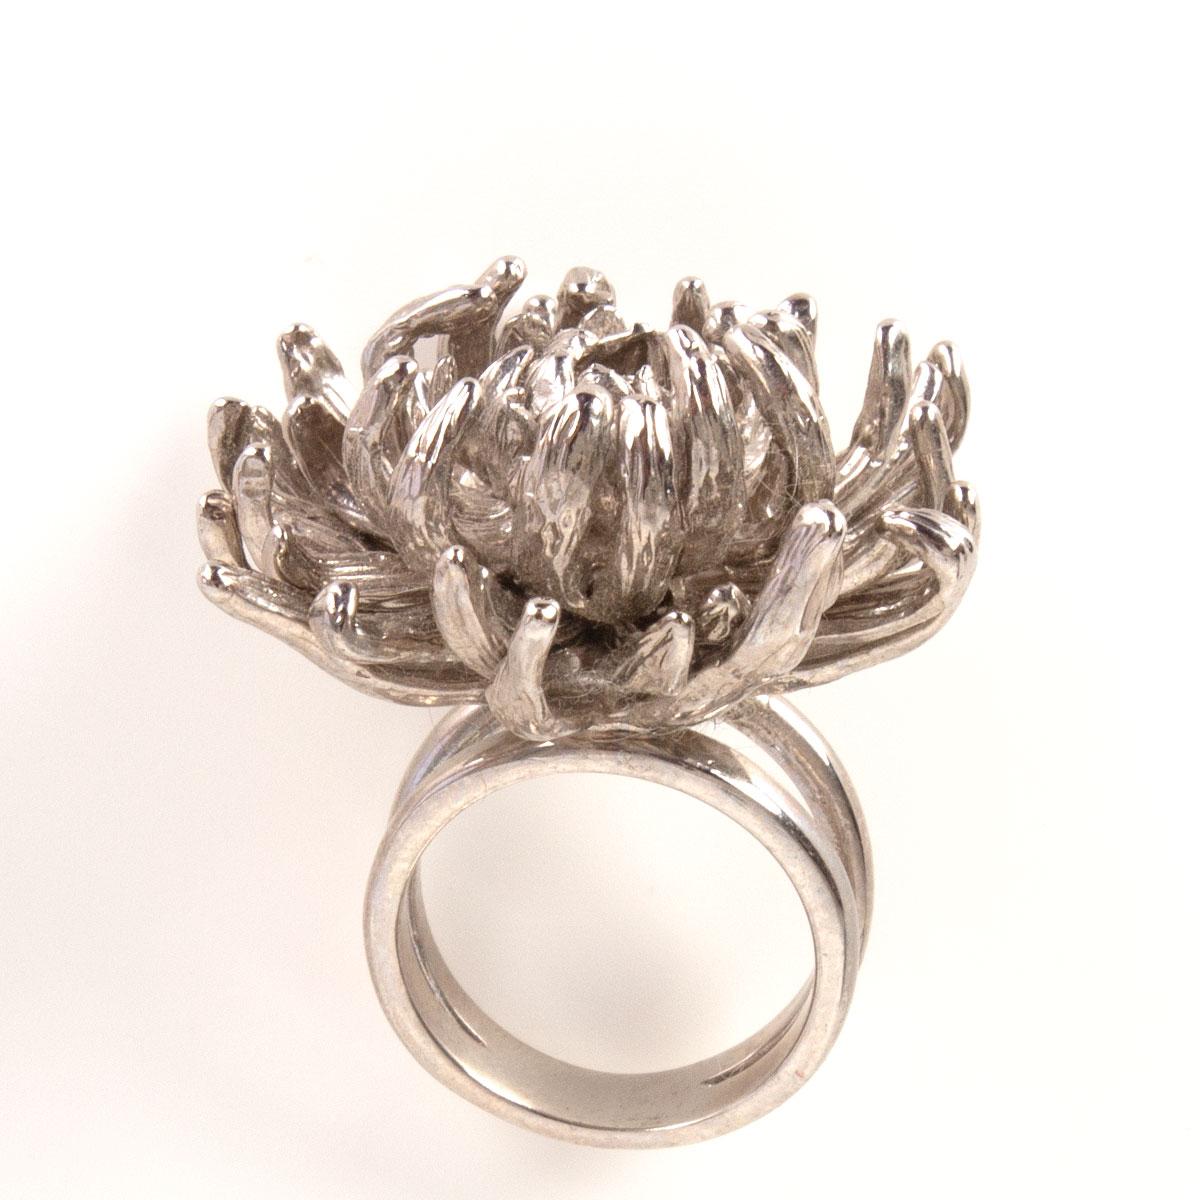 Alexander McQuee flower ring in silver-tone brass. Has been worn and is in excellent condition.

Tag Size 6.5
Width 3cm (1.2in)
Length 4cm (1.6in)